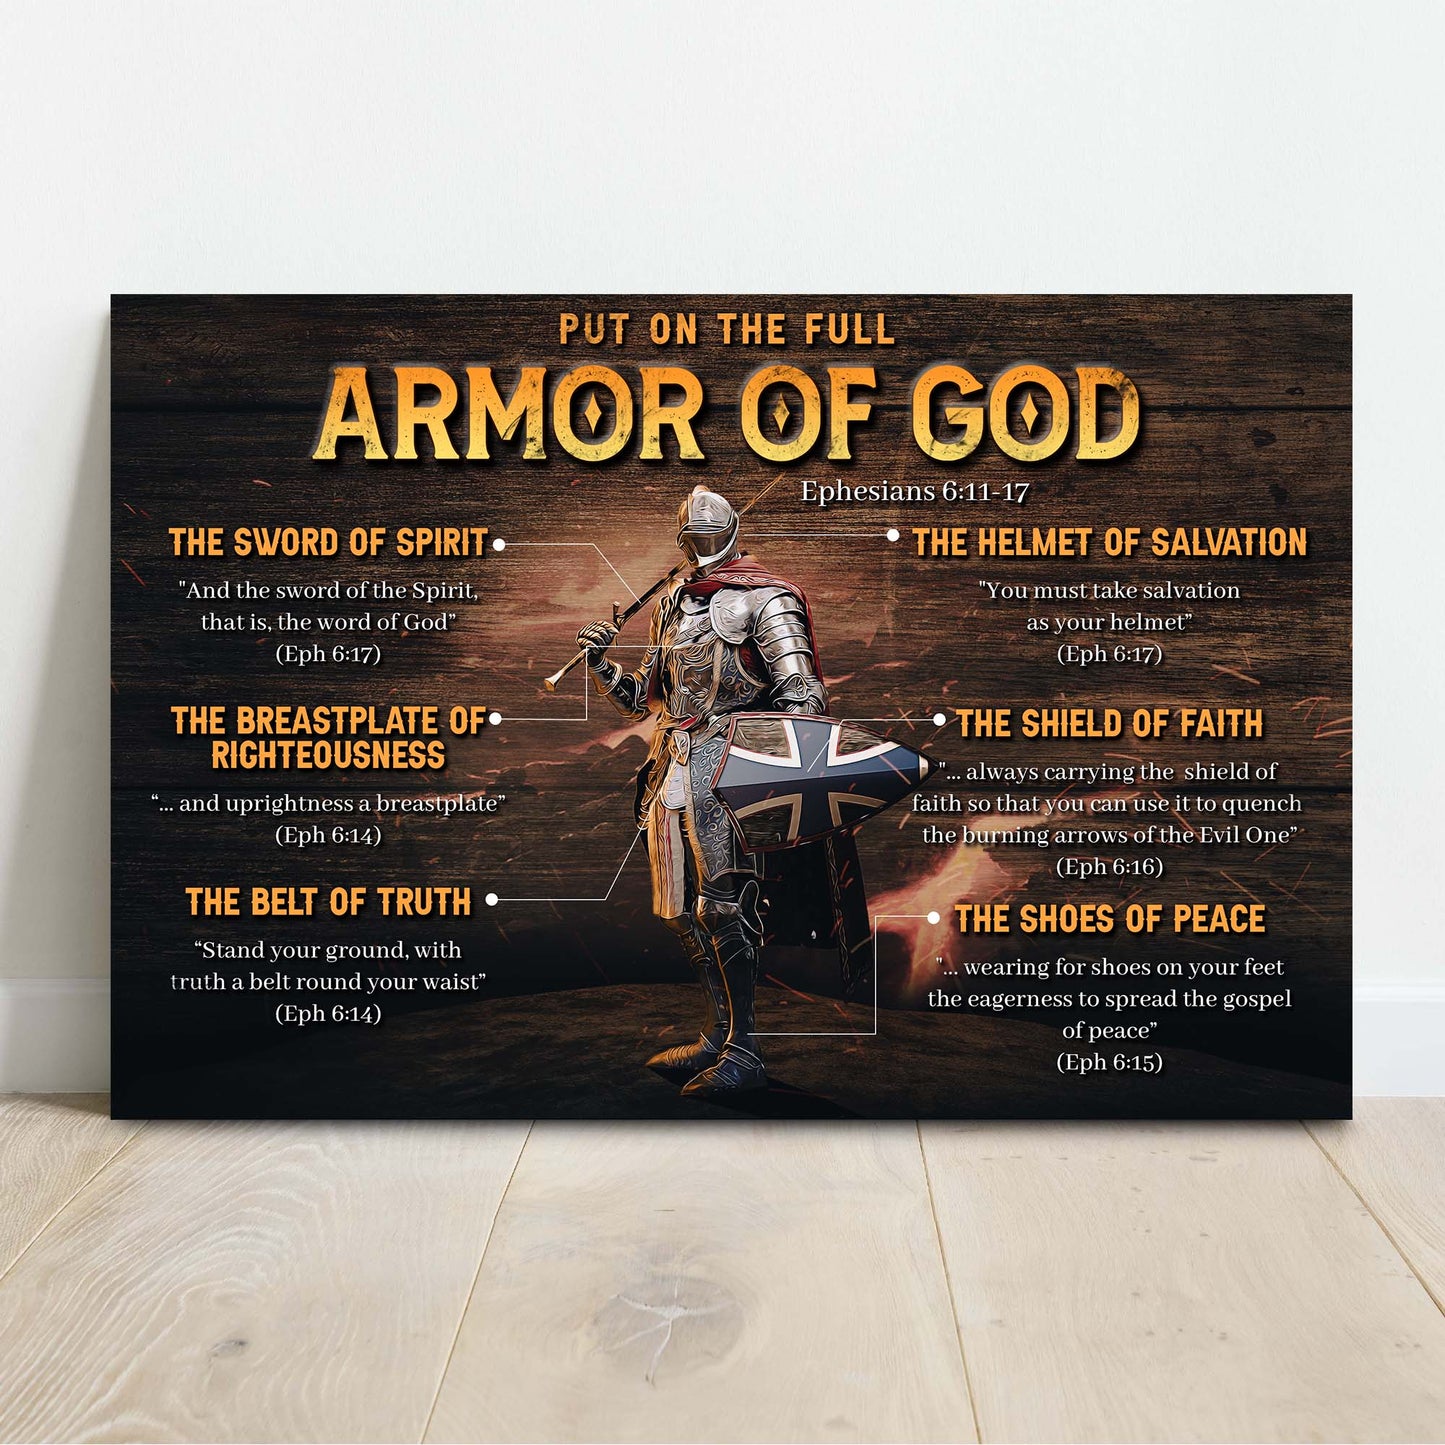 Armor Of God Sign - Image by Tailored Canvases